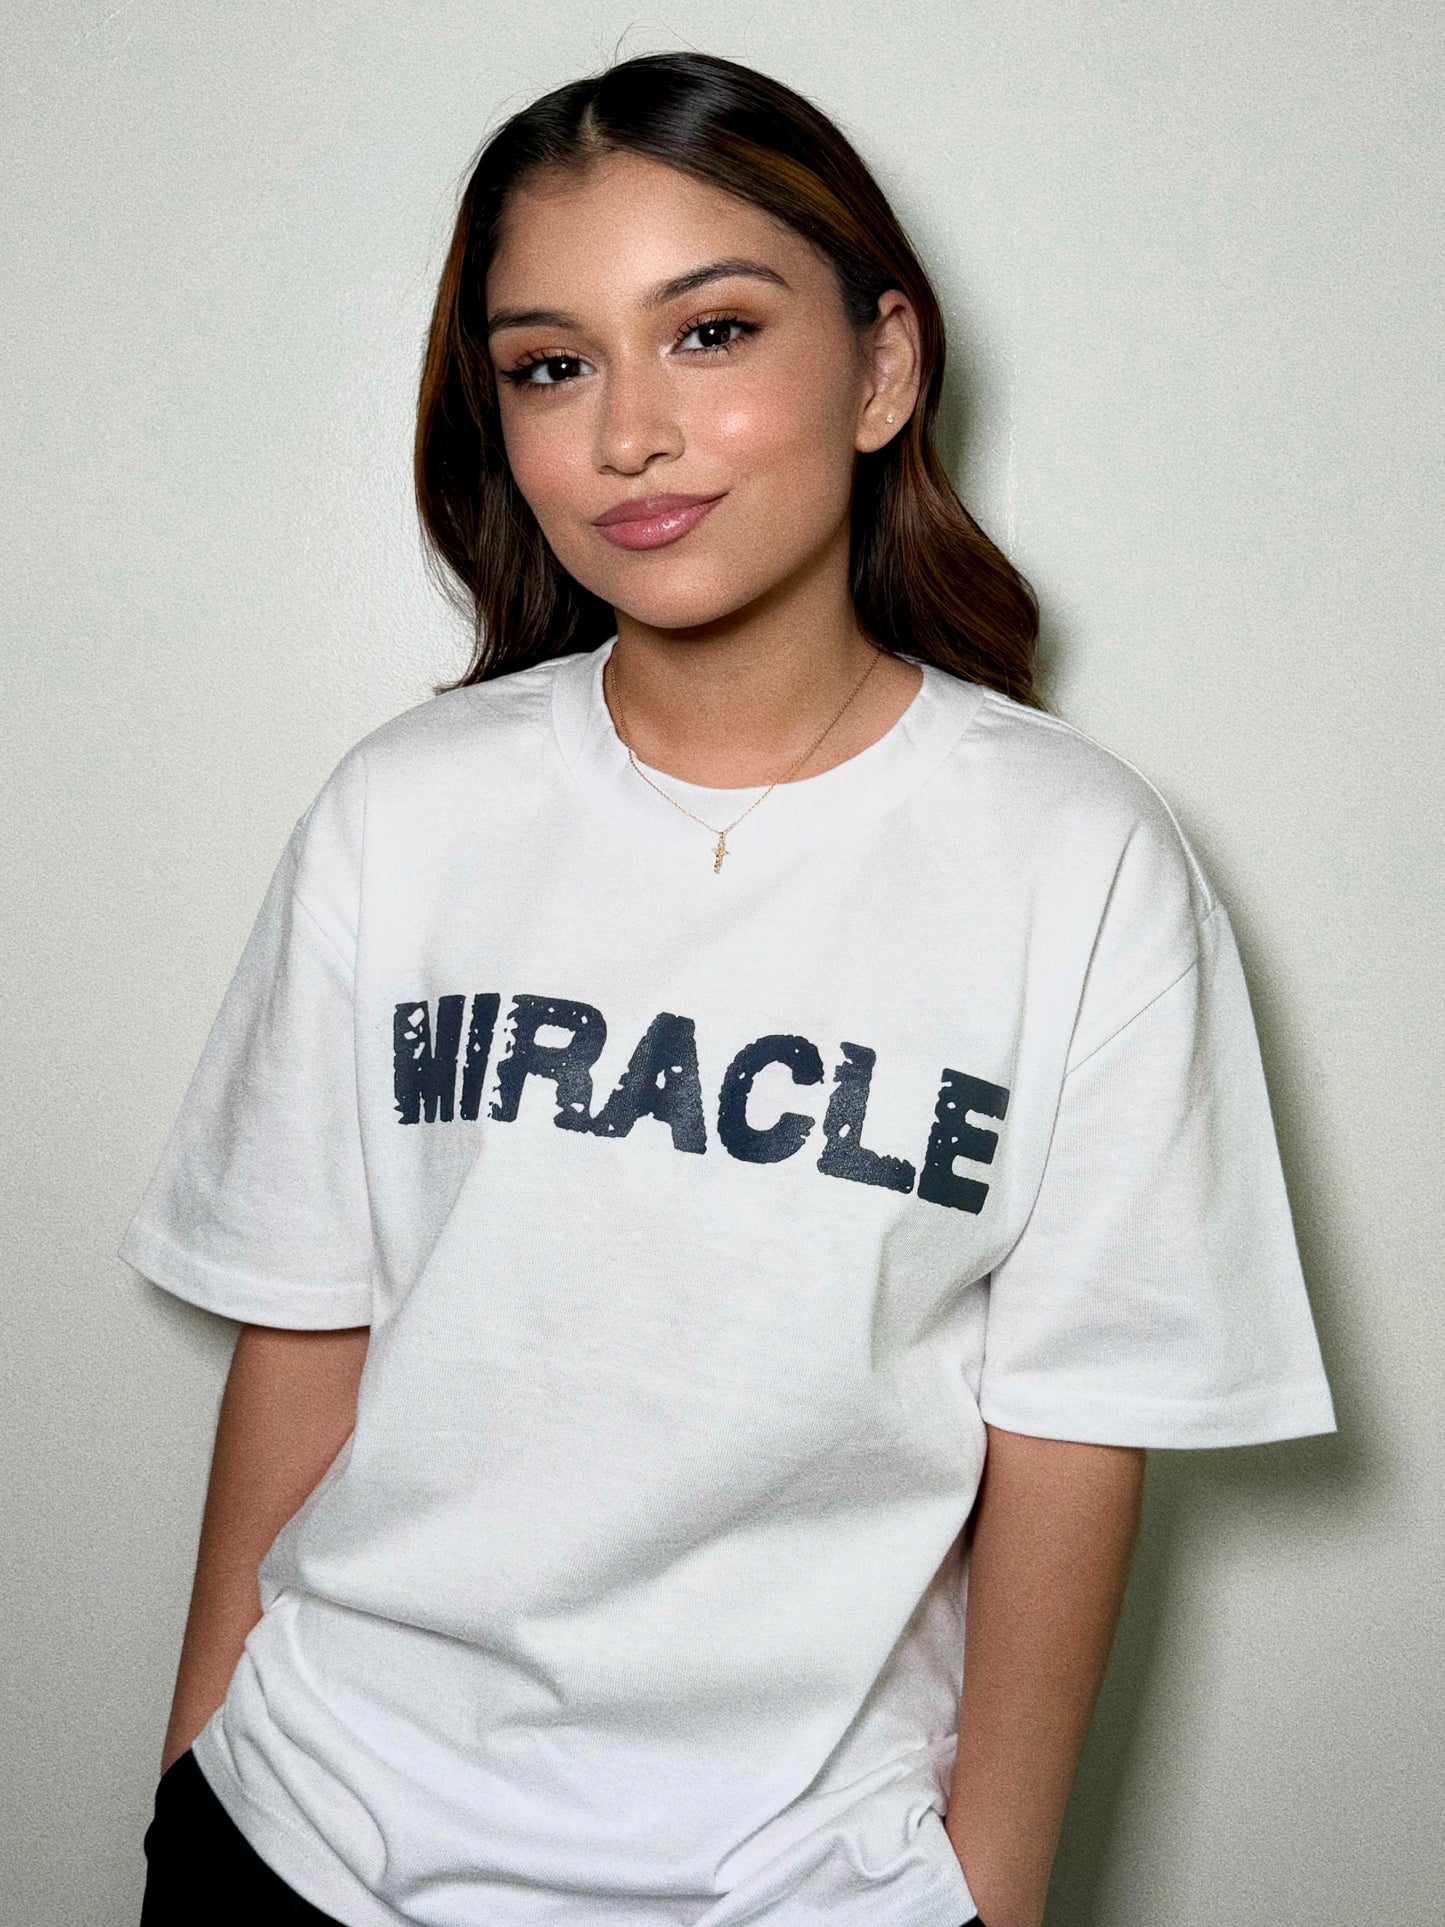 Walking In A Miracle T-Shirt